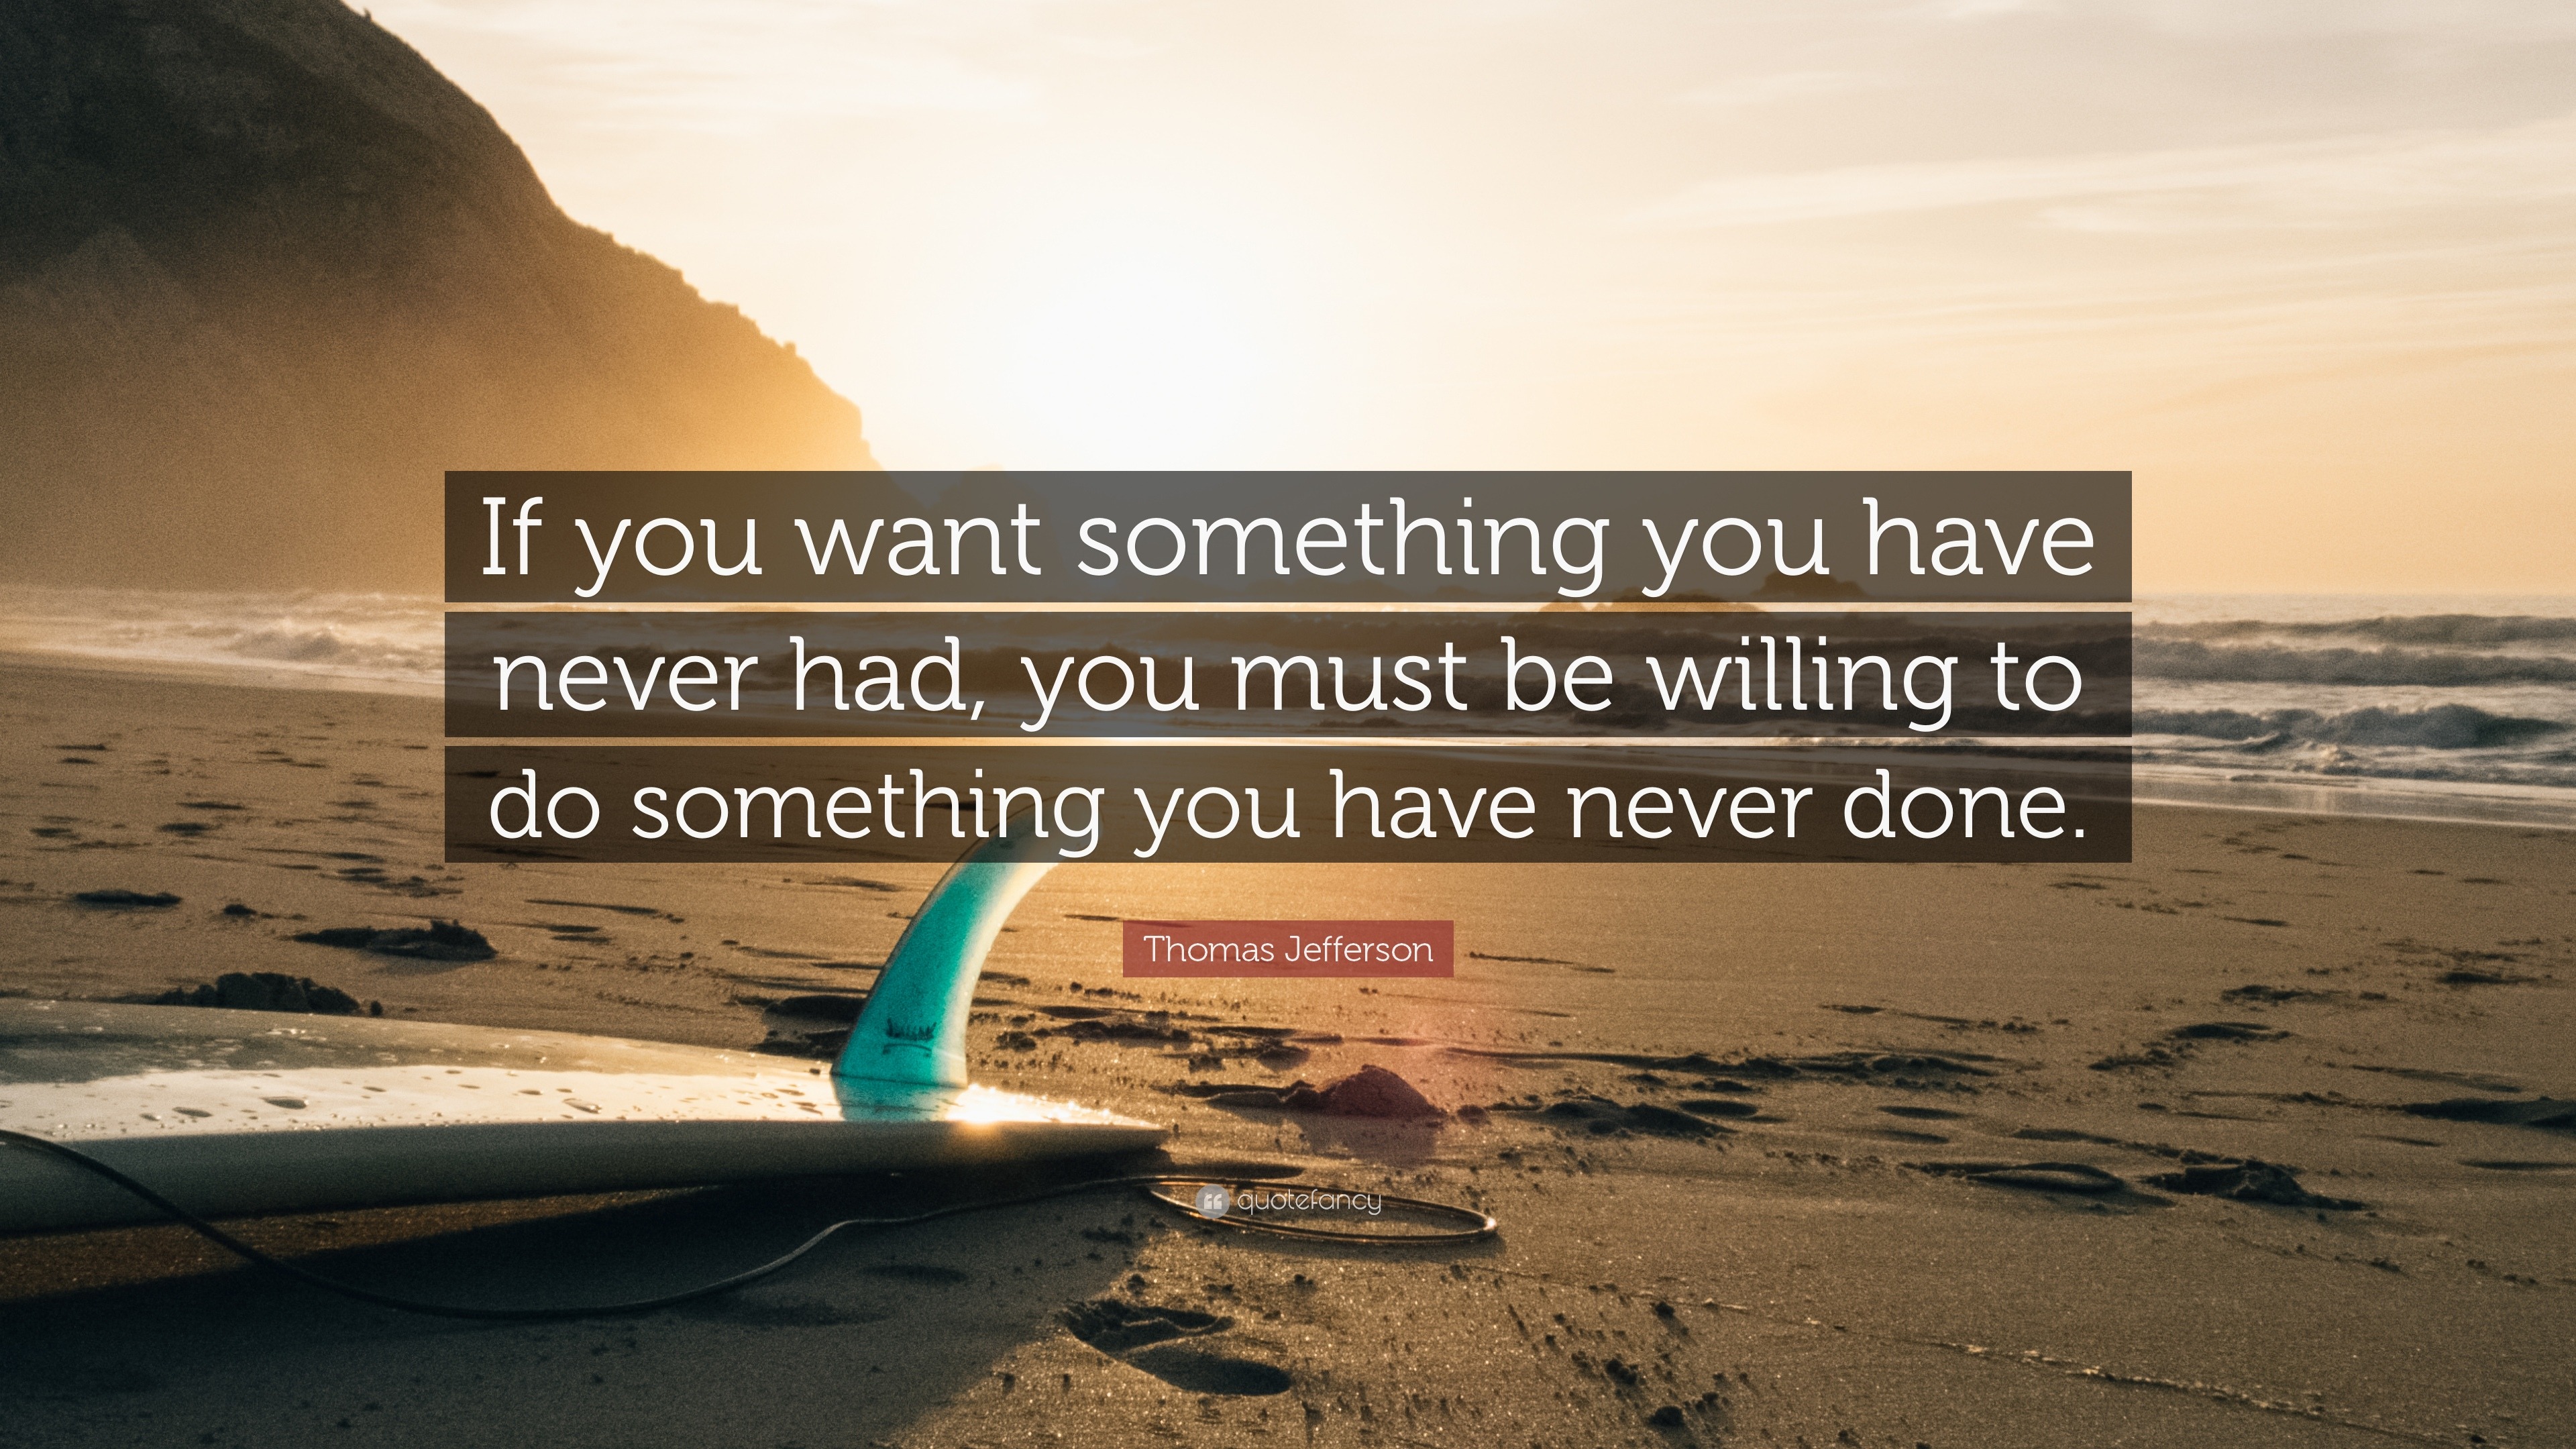 Thomas Jefferson Quote: “If you want something you have ...